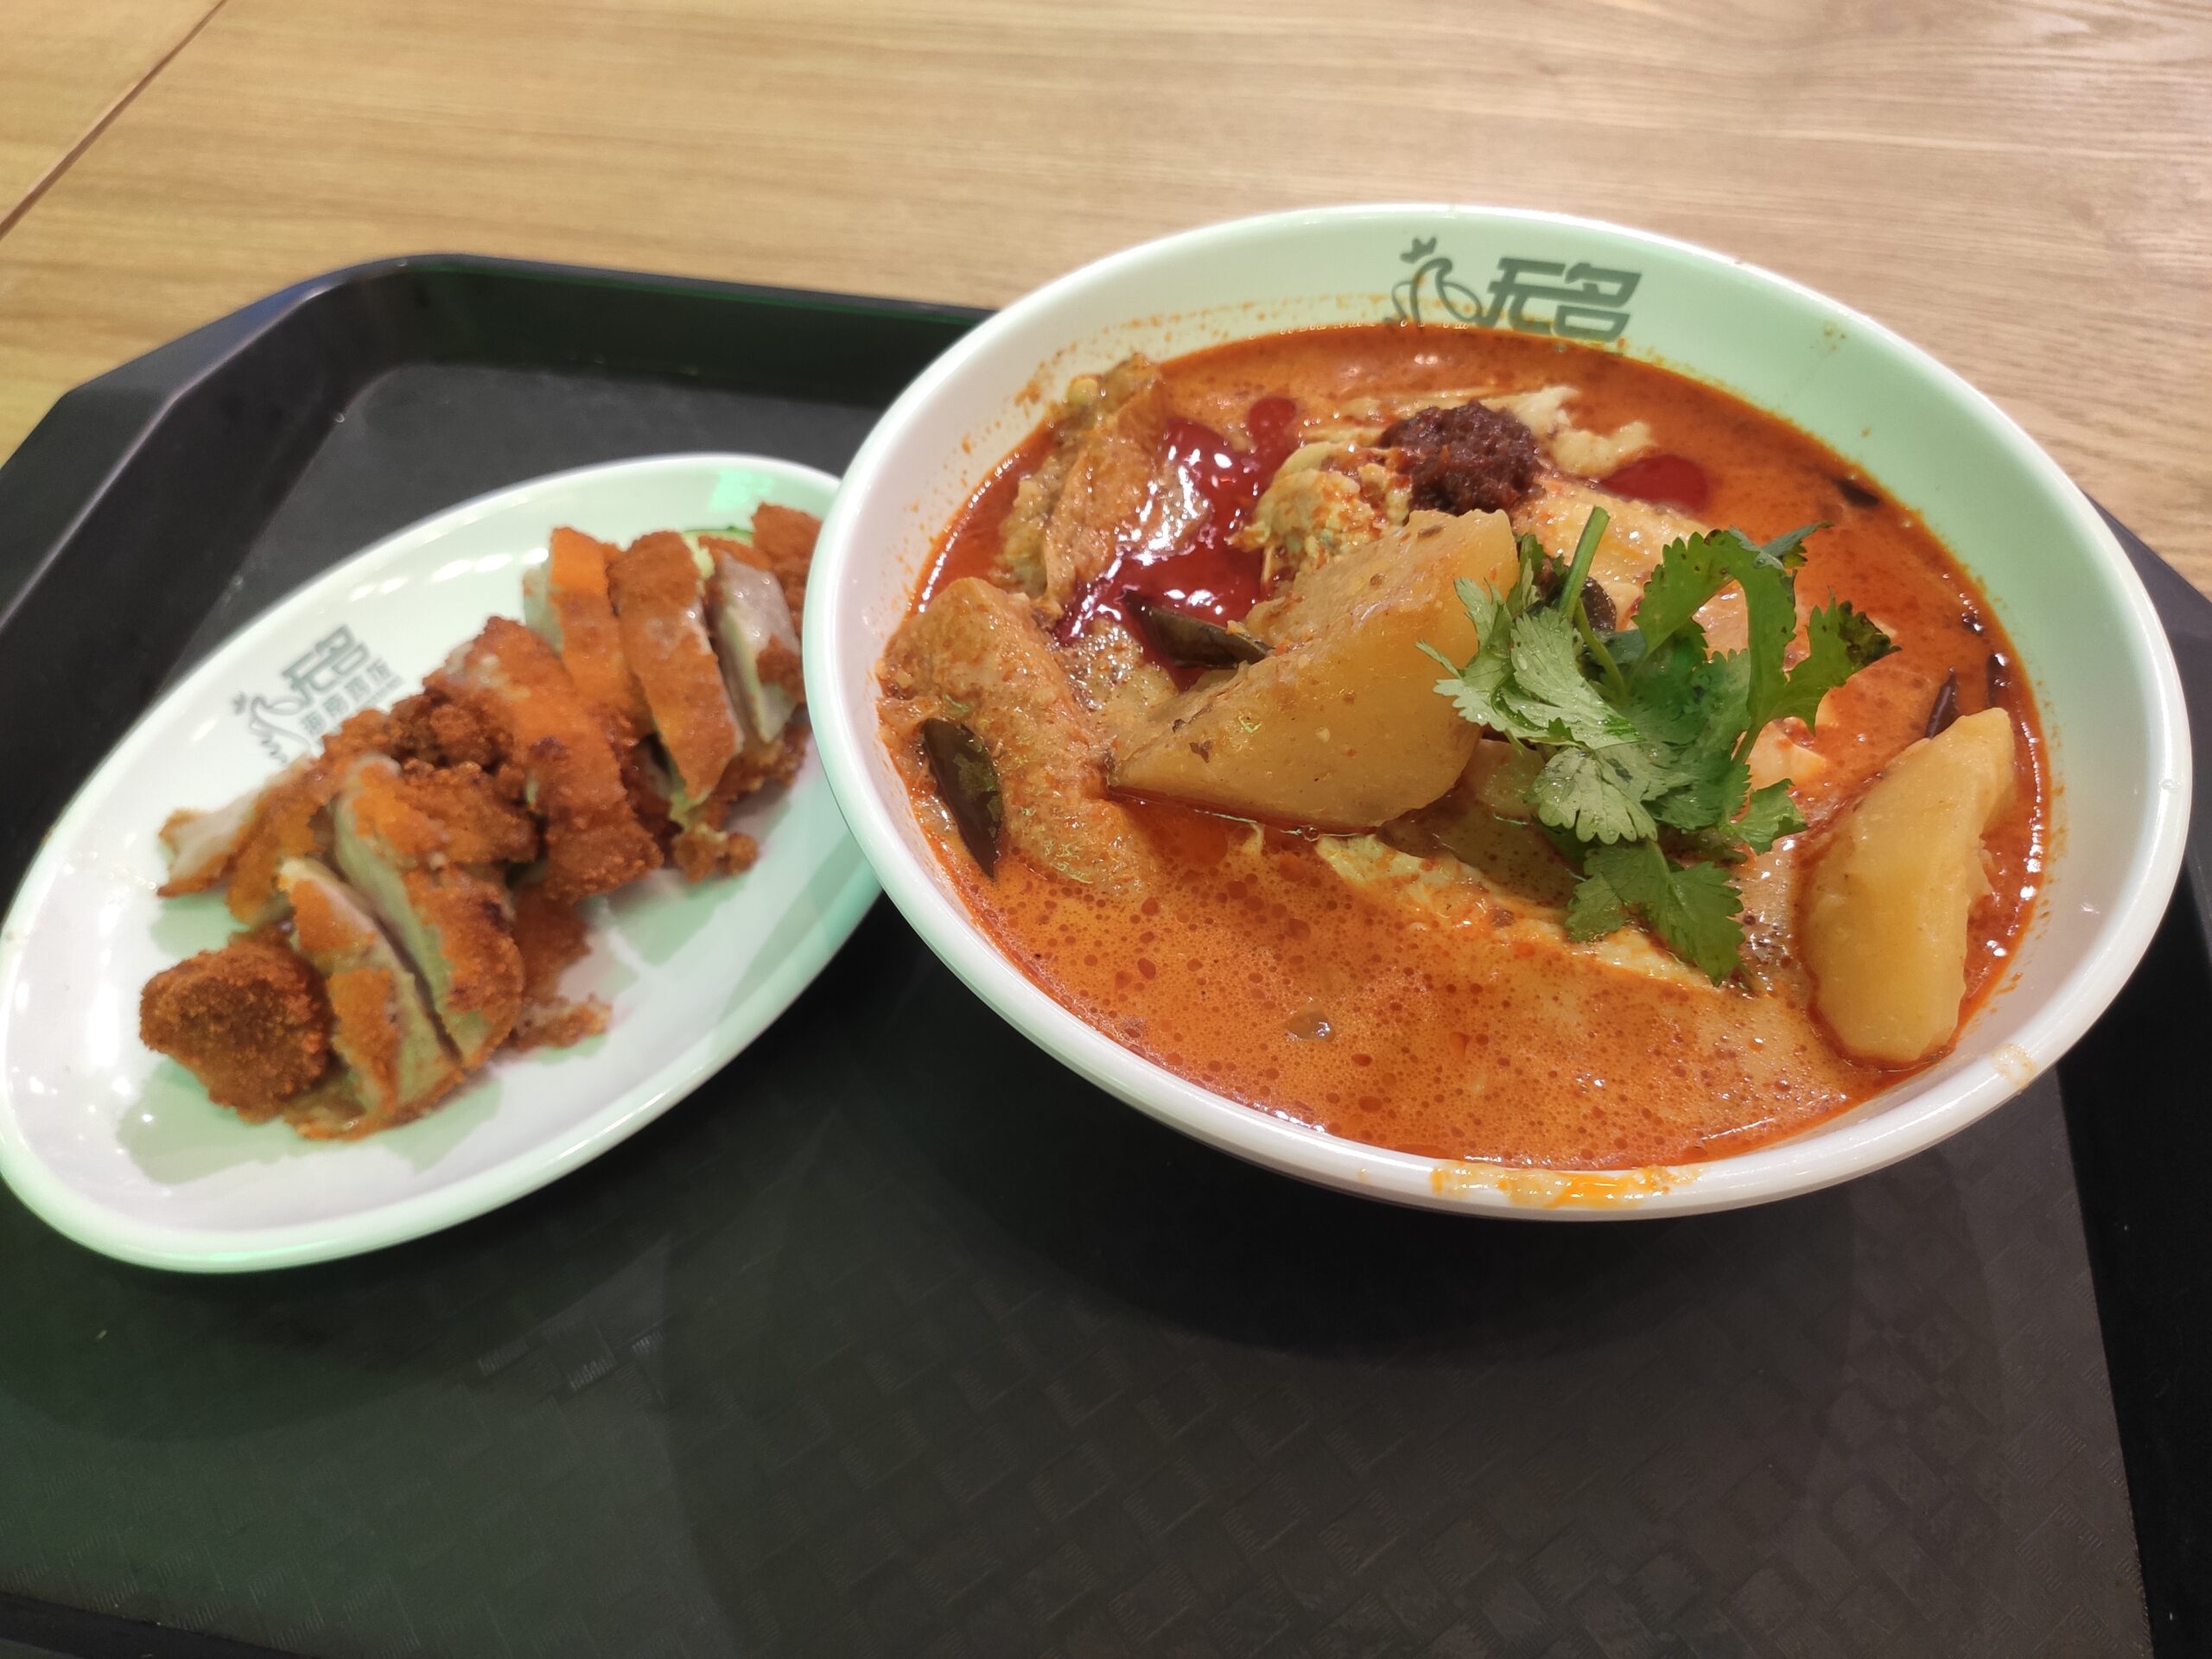 Wu Ming Hainanese Chicken Rice: Curry Chicken Noodles with Chicken Cutlet